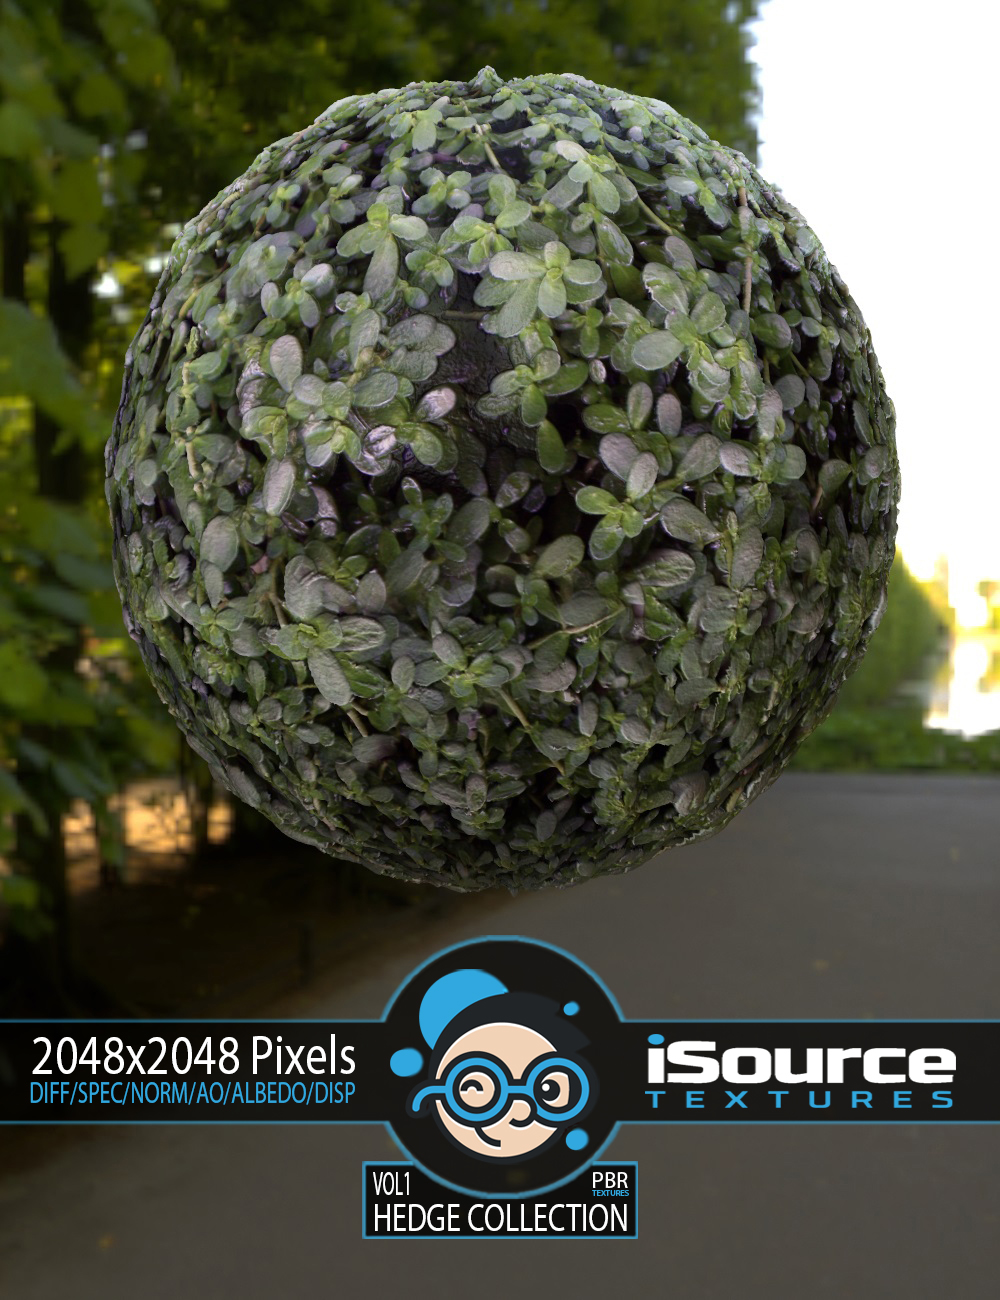 Hedge Collection Merchant Resource - Vol1 (PBR Textures) by: iSourceTextures, 3D Models by Daz 3D